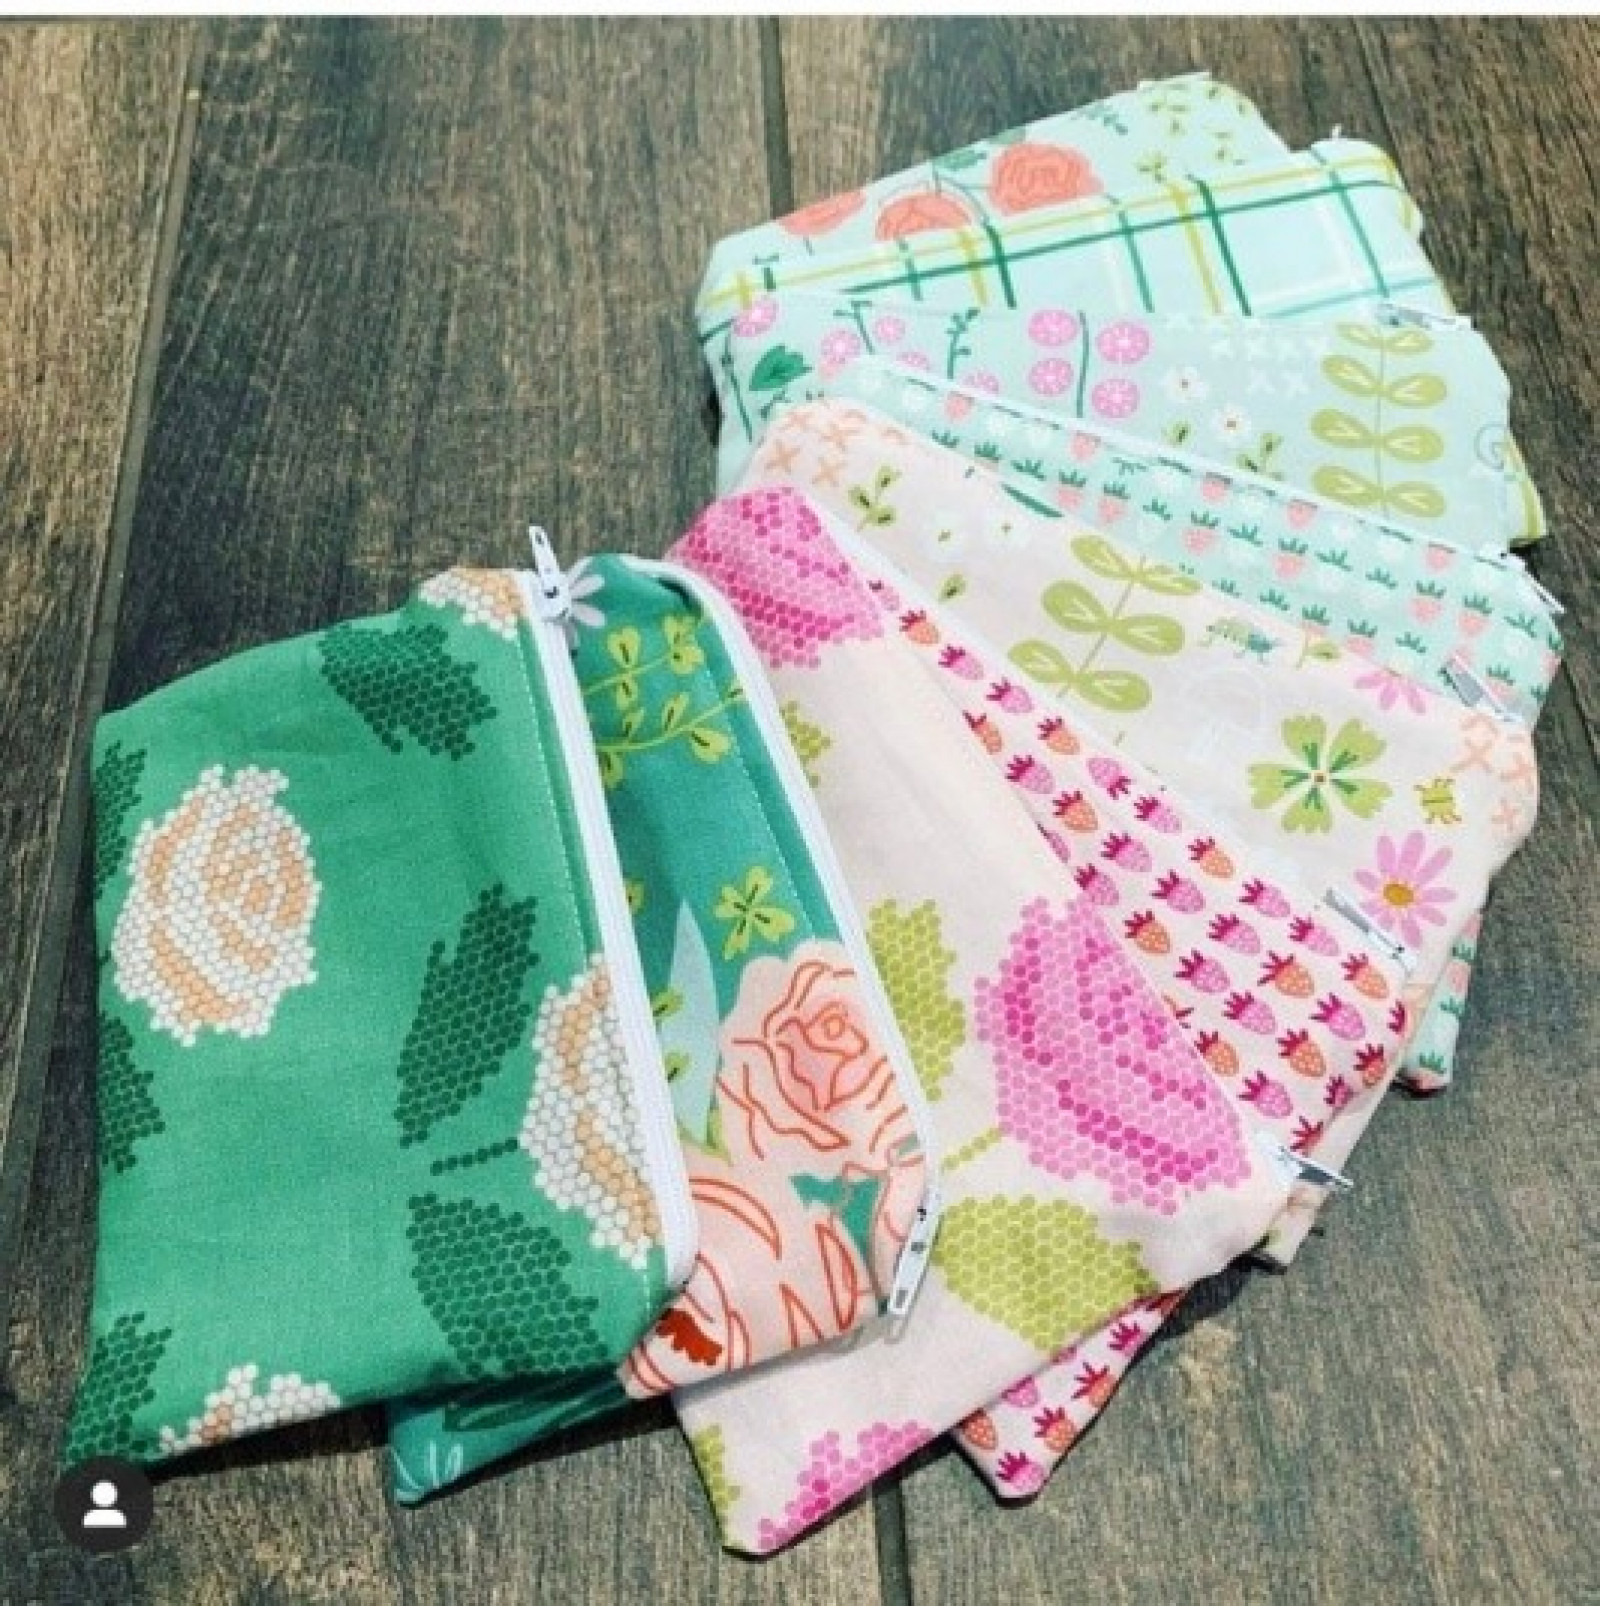 Baby Lock quilting